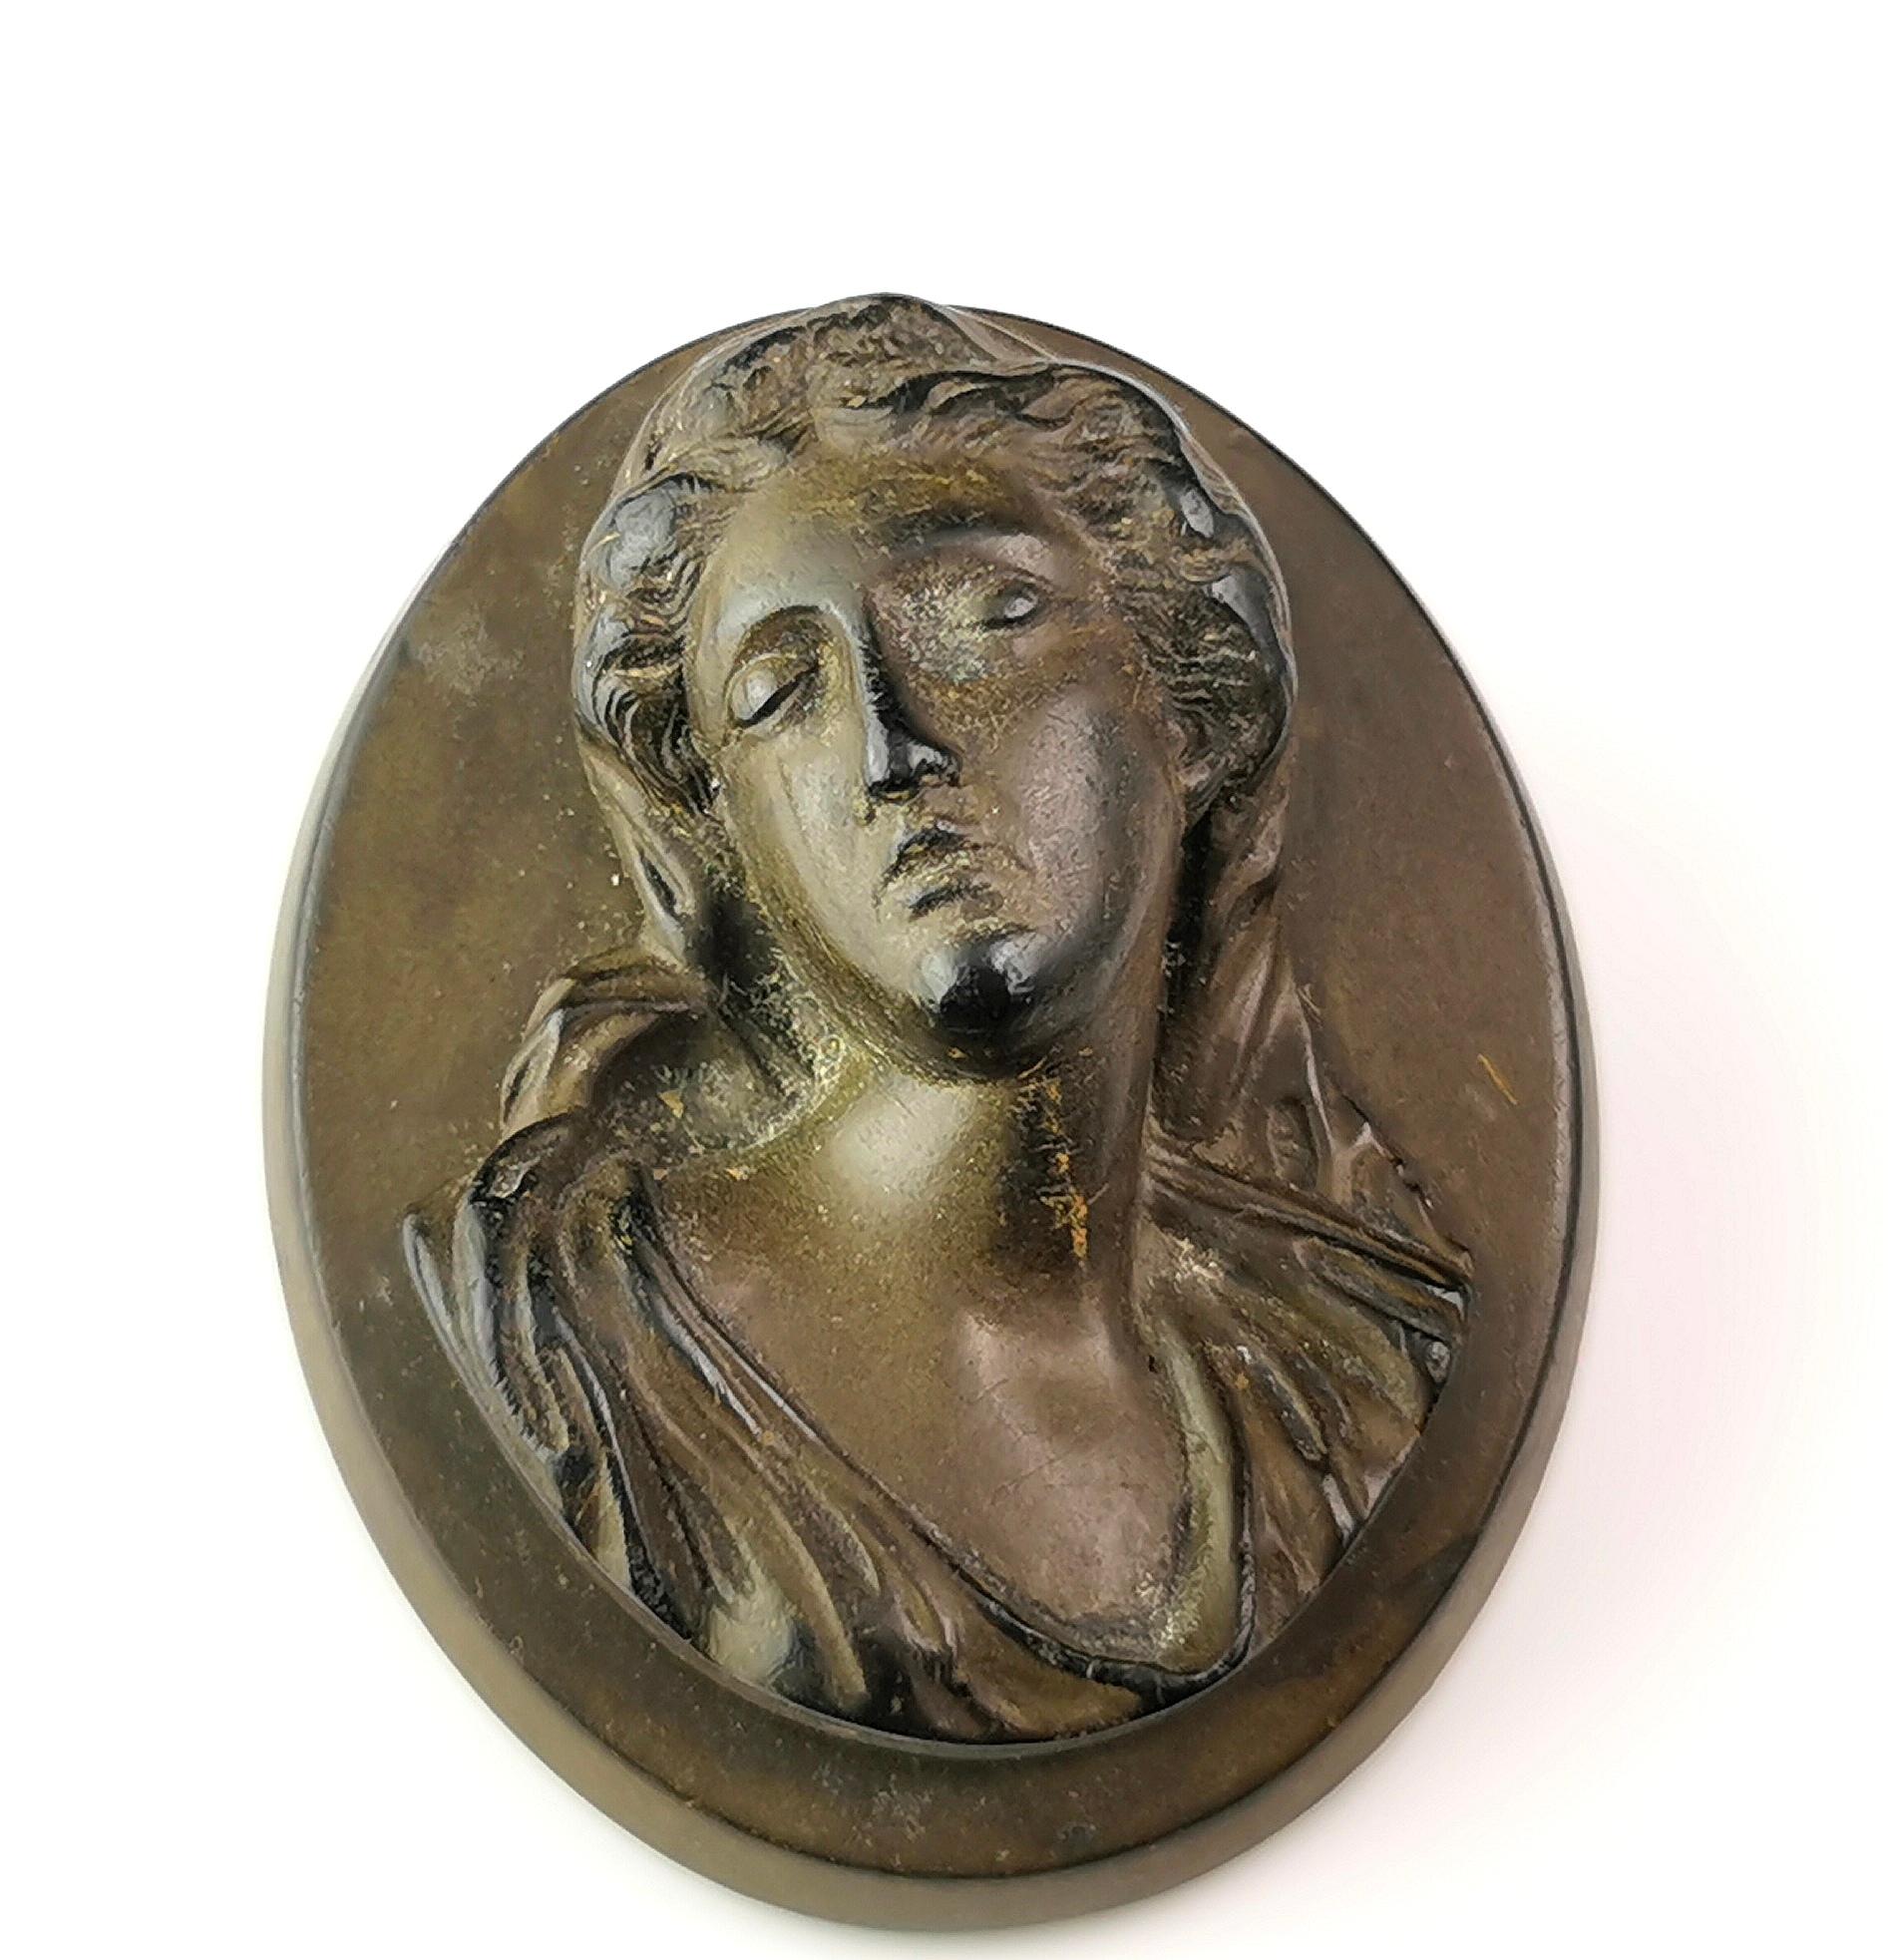 An interesting antique Victorian era Vulcanite cameo brooch.

It is a very well designed piece depicting a lady, possibly Mary.

The cameo has some lightening to the Vulcanite but no chips or cracks and is a nice unusual design.

Vulcanite was